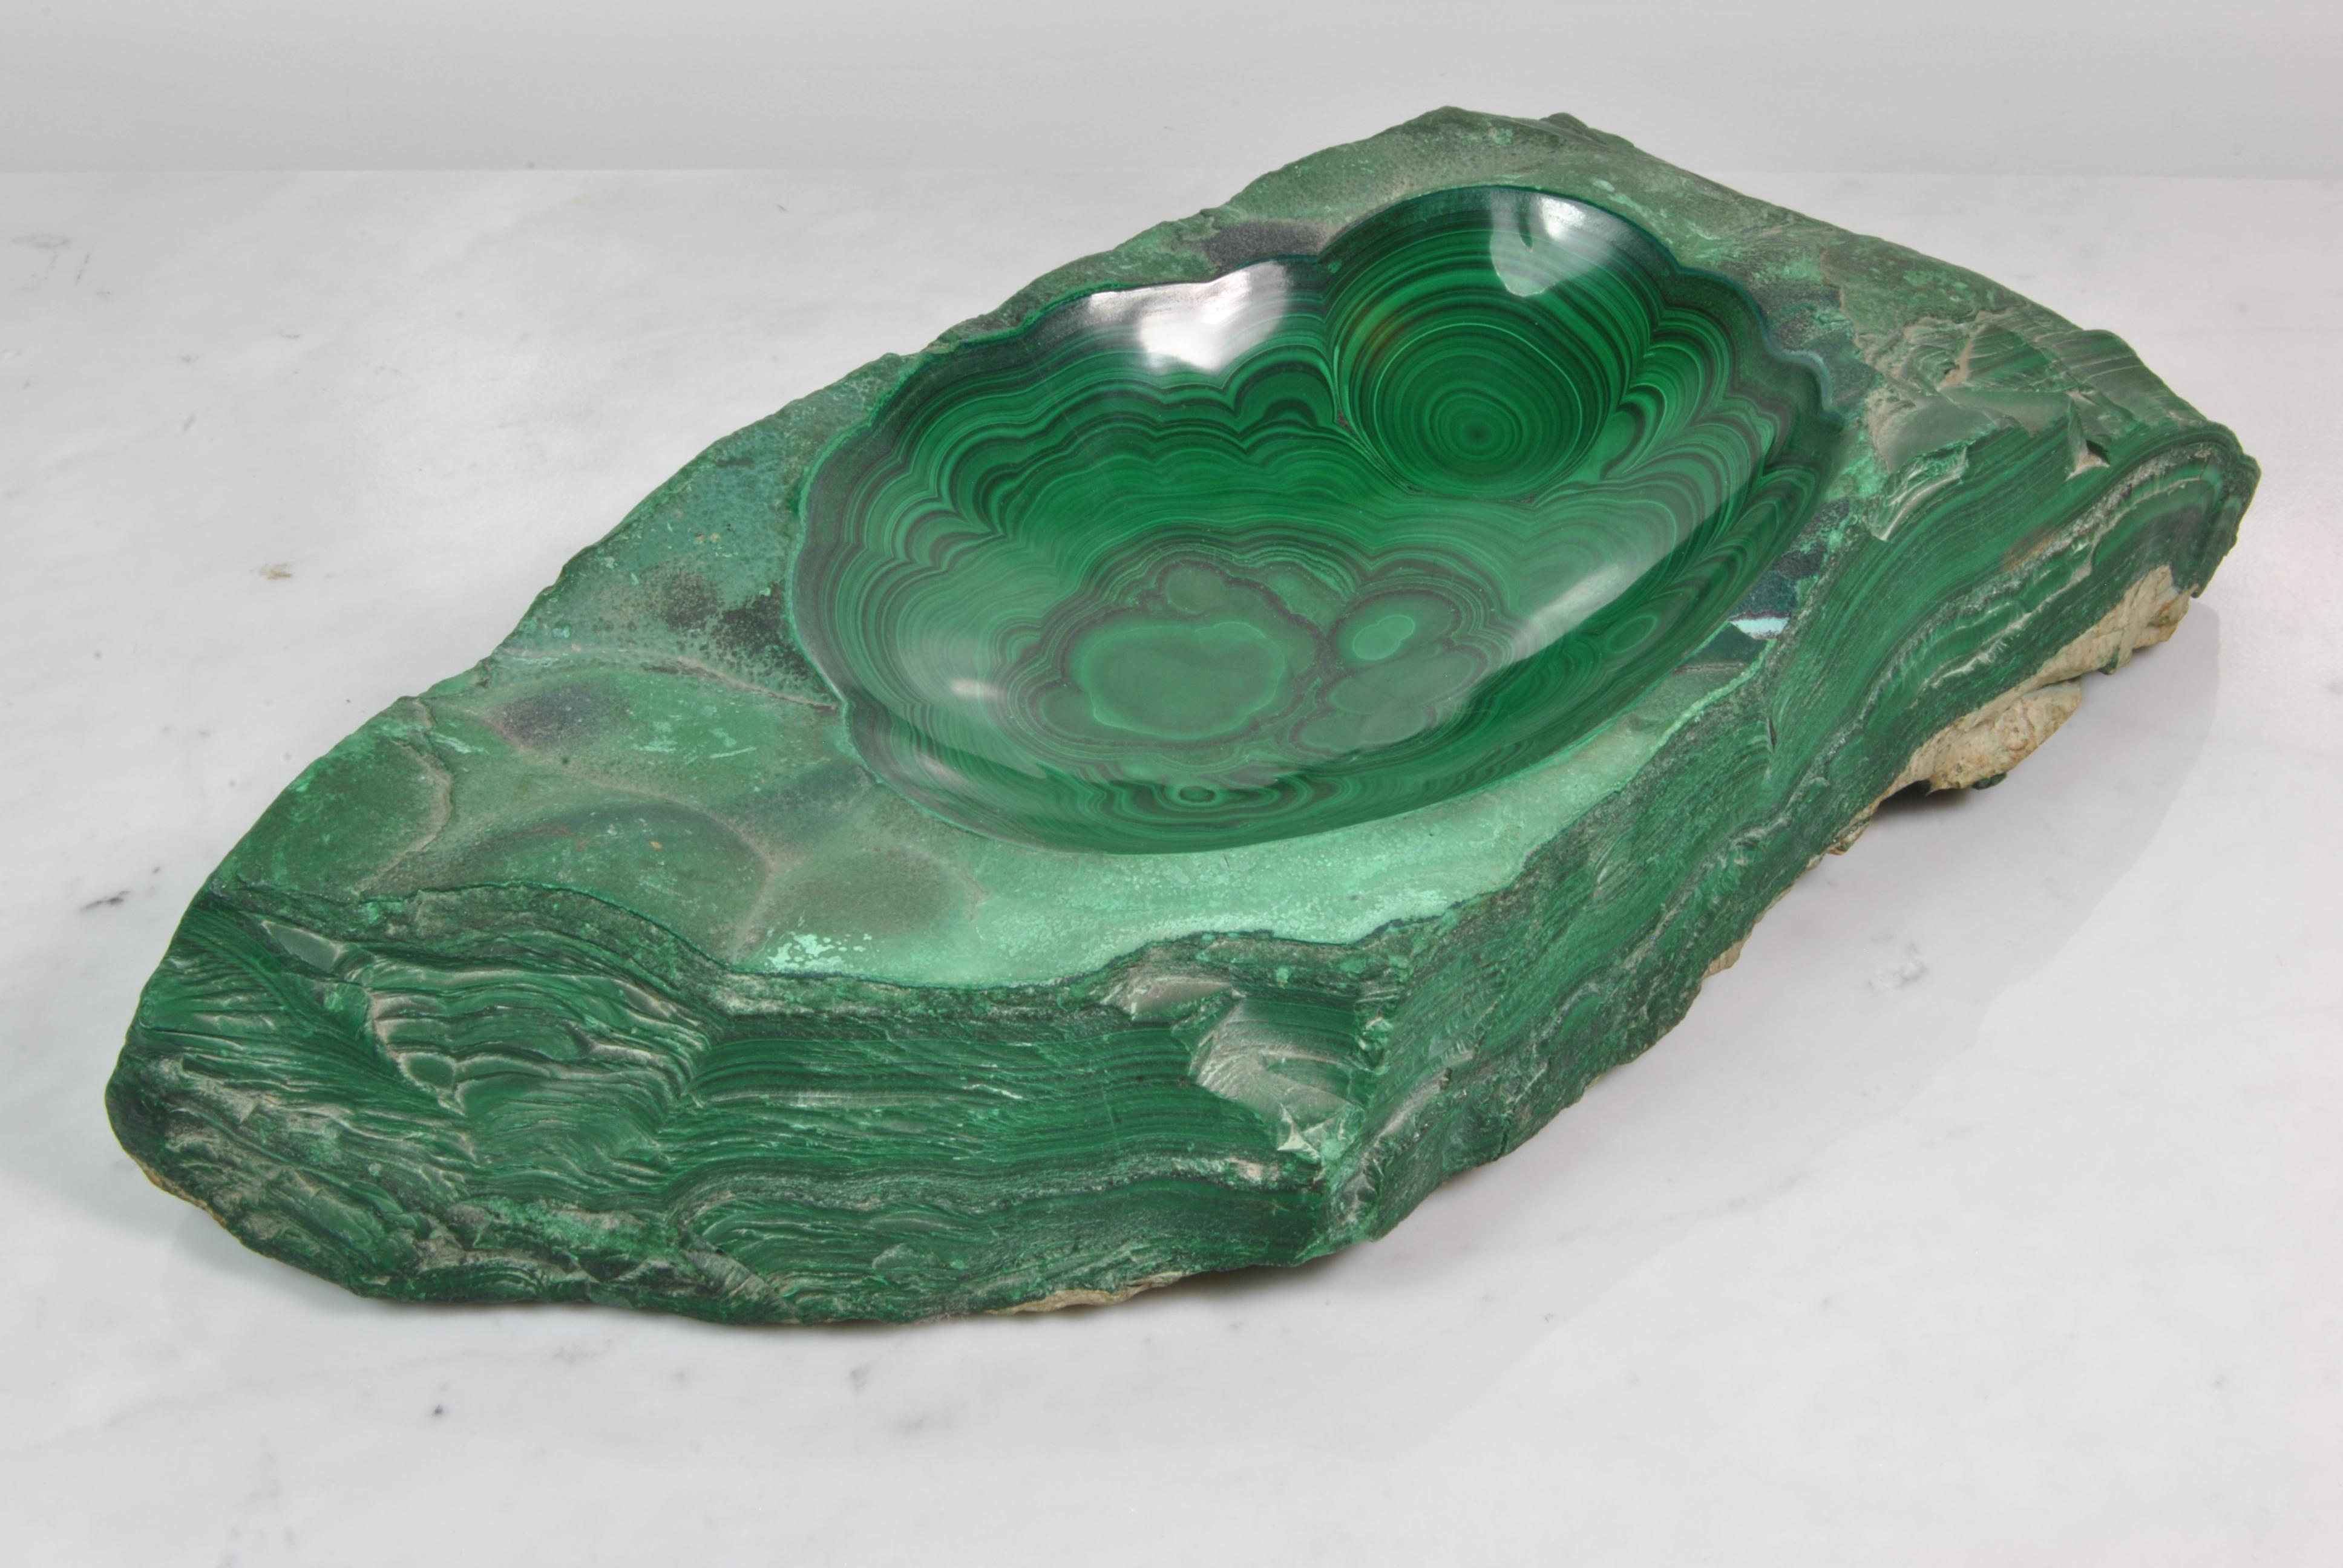 European Awesome Bowl of All Natural Malachite Mineral Stone, Italy, 1950